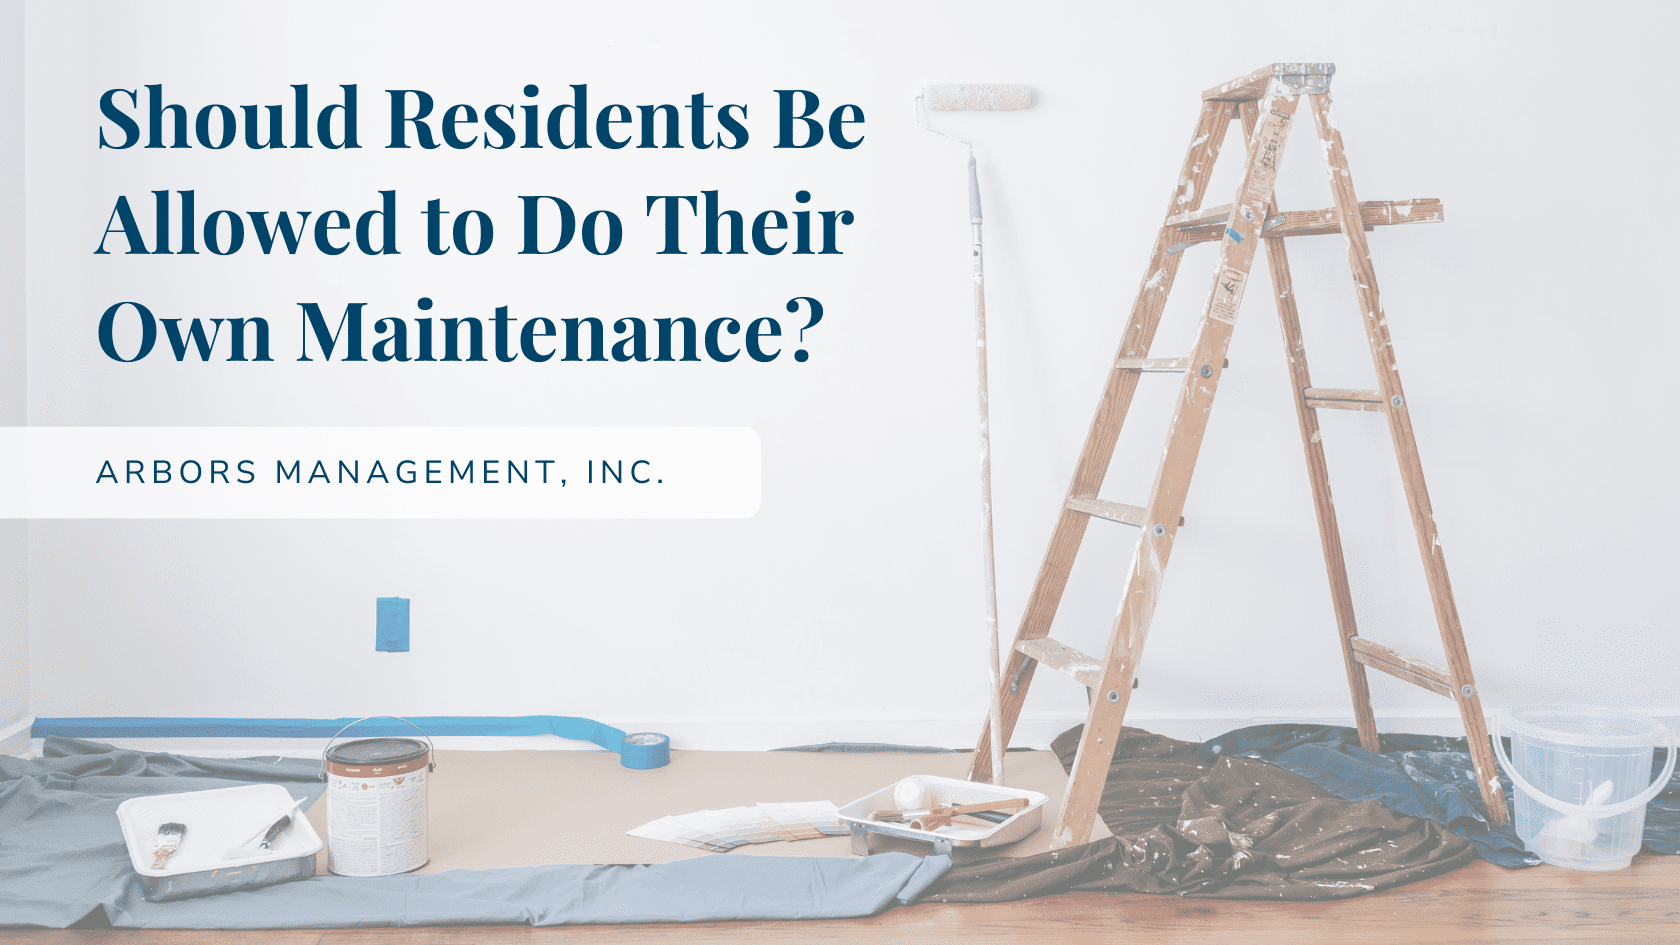 Should Residents Be Allowed to Do Their Own Maintenance?